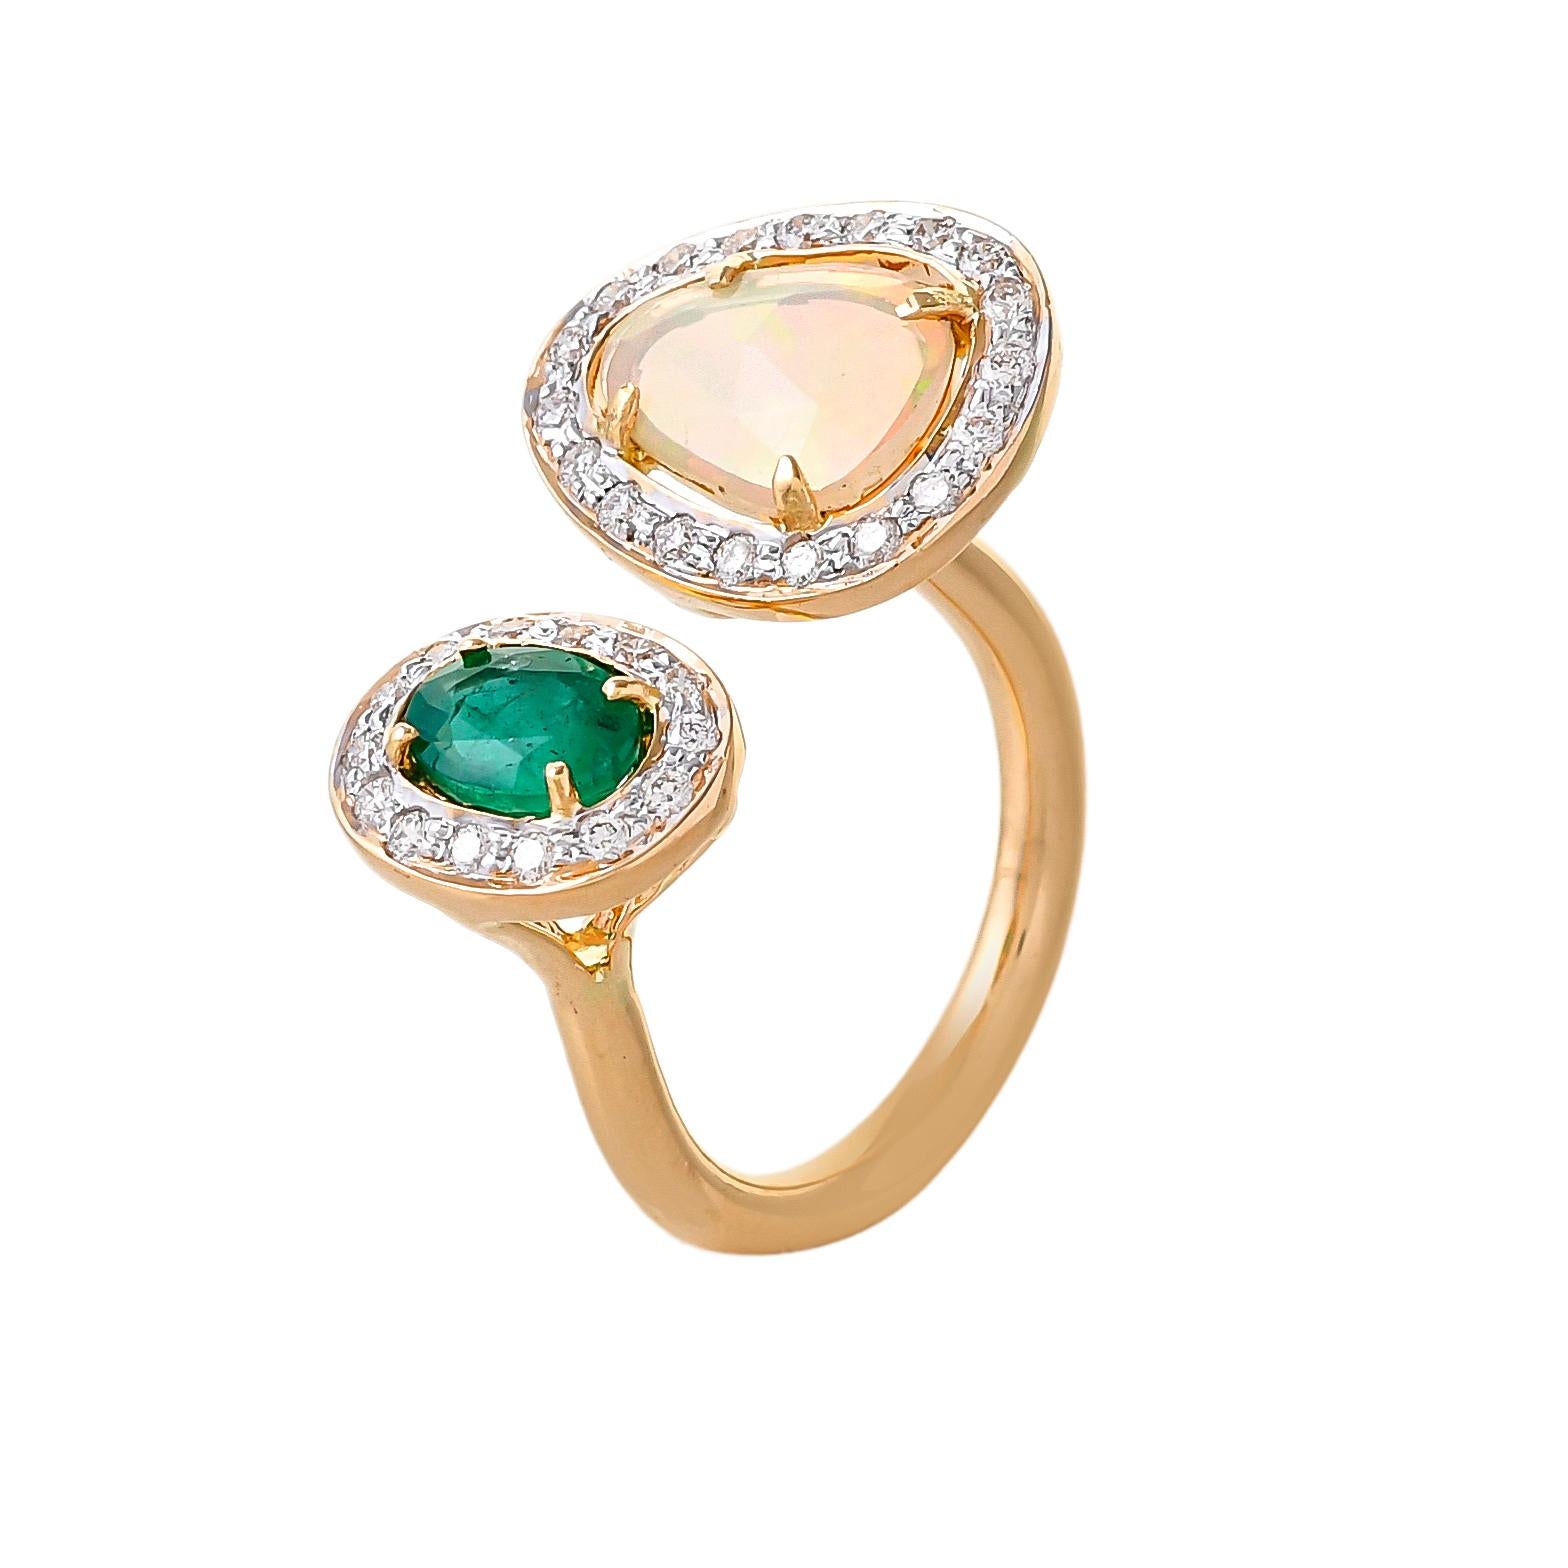 Let your hand do the talking by wearing this beautifully crafted ring featuring Ethiopian Opal Flat weighing approximately 0.86 carats accented by a fine color oval shaped emerald weighing approximately 0.92 carats surrounded with diamonds with a